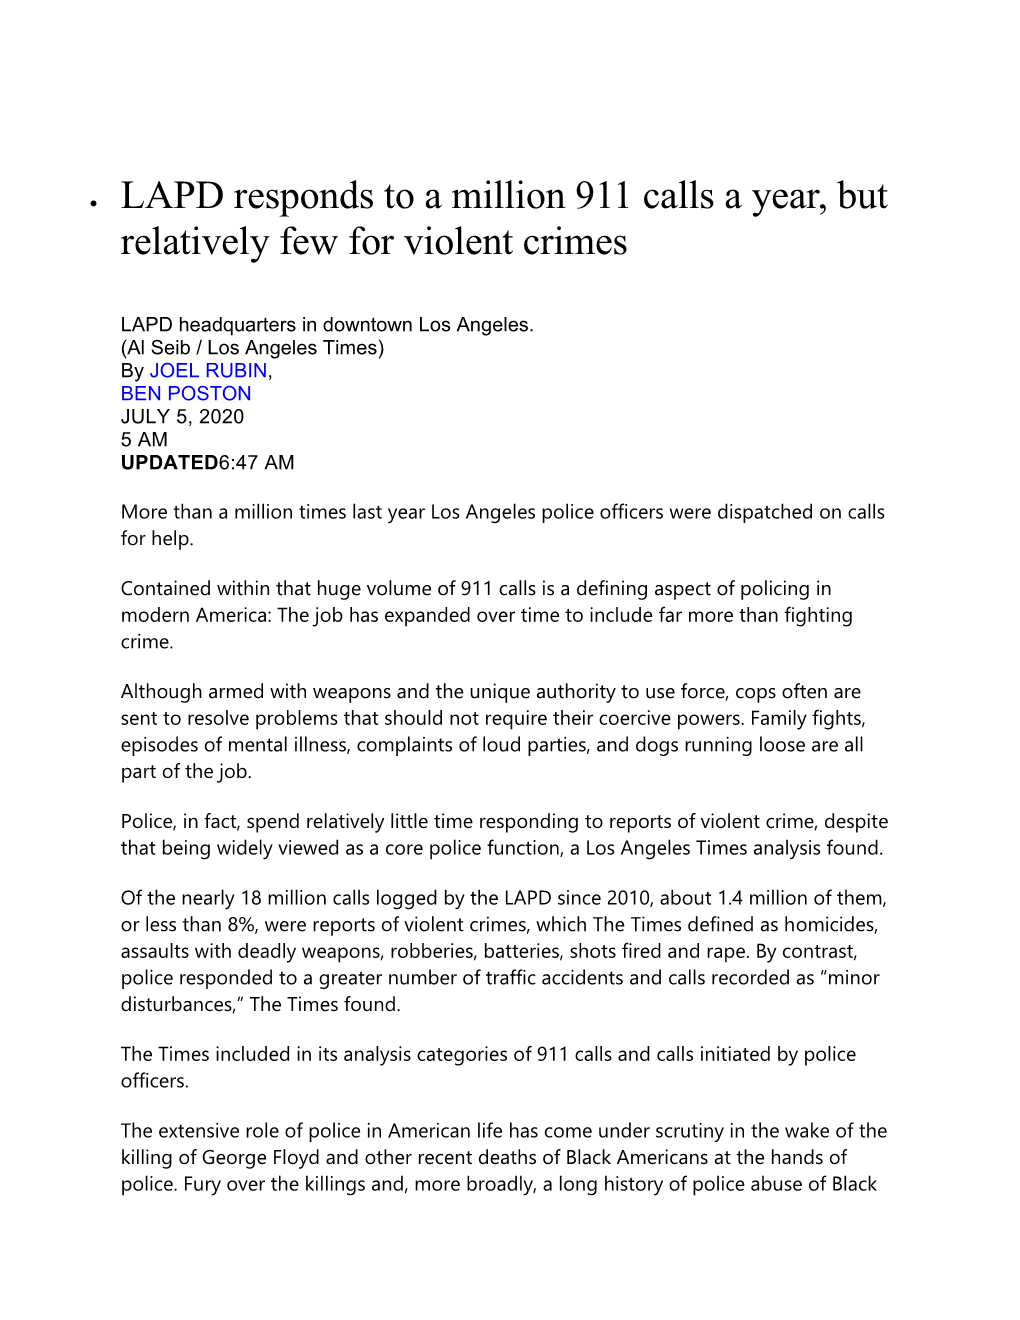 • LAPD Responds to a Million 911 Calls a Year, but Relatively Few for Violent Crimes